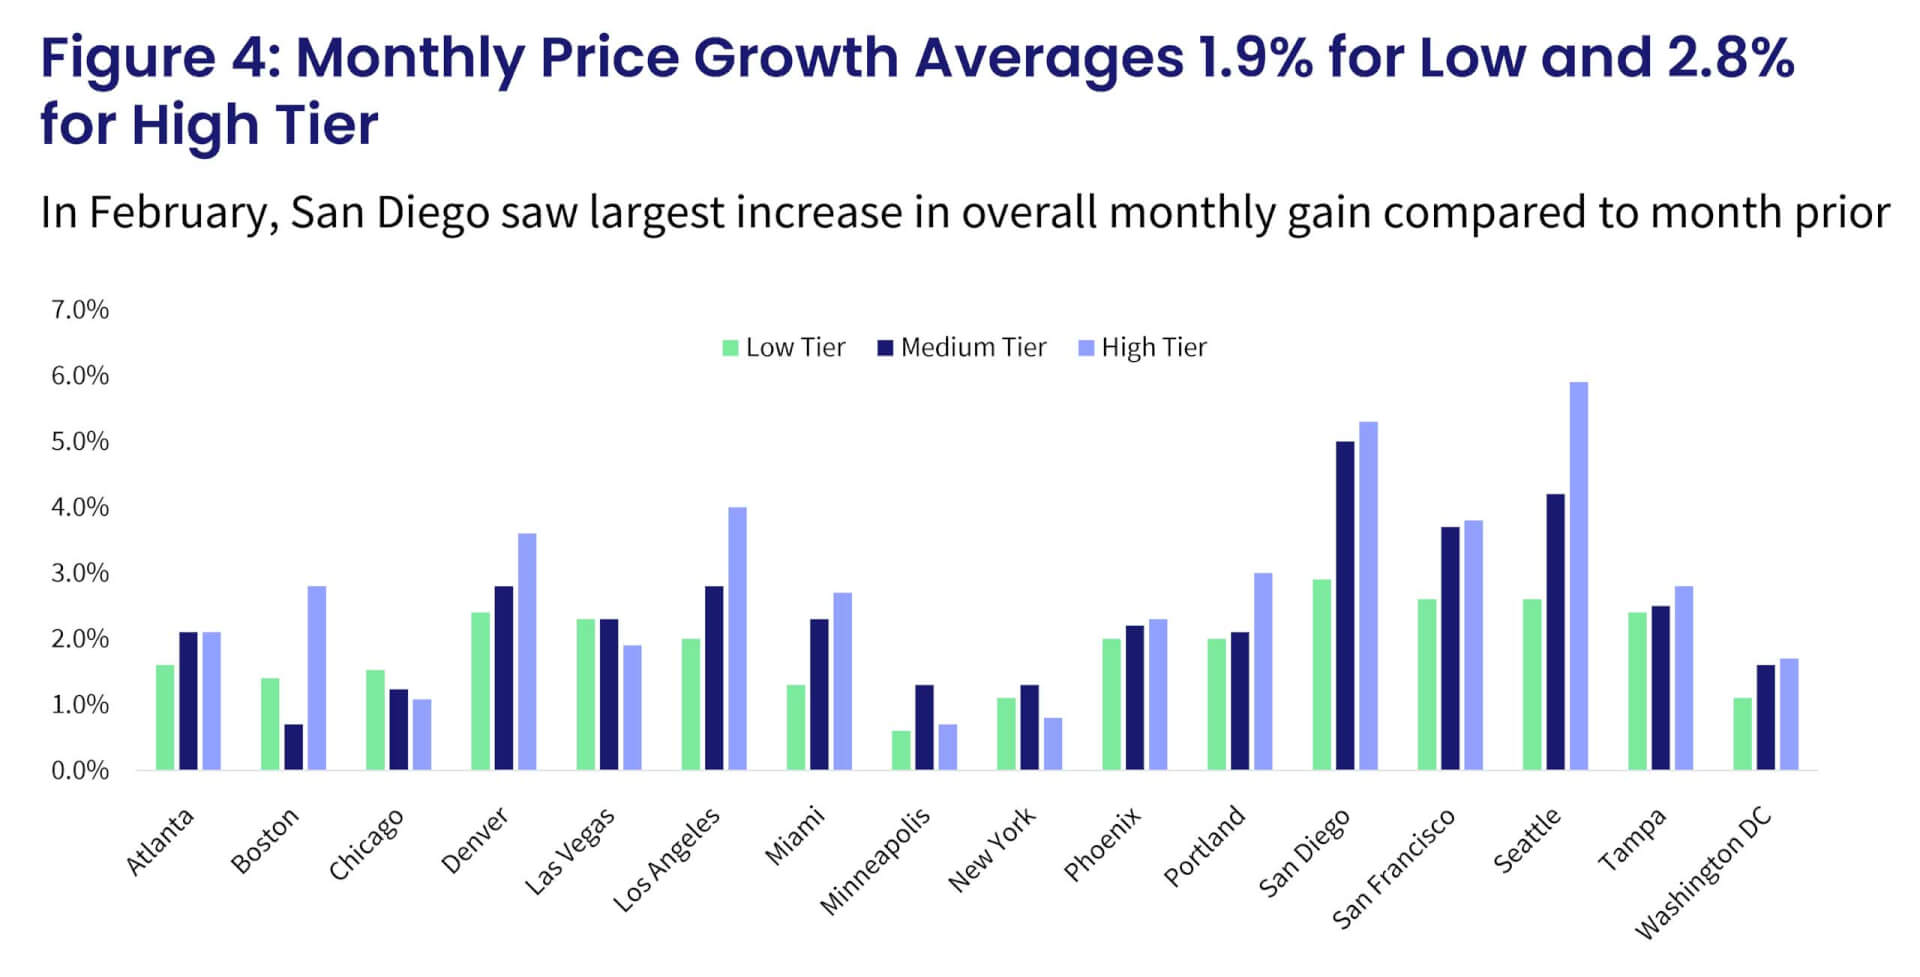 Figure 4: Monthly Price Growth Averages 1.9% for Low and 2.8% for High Tier